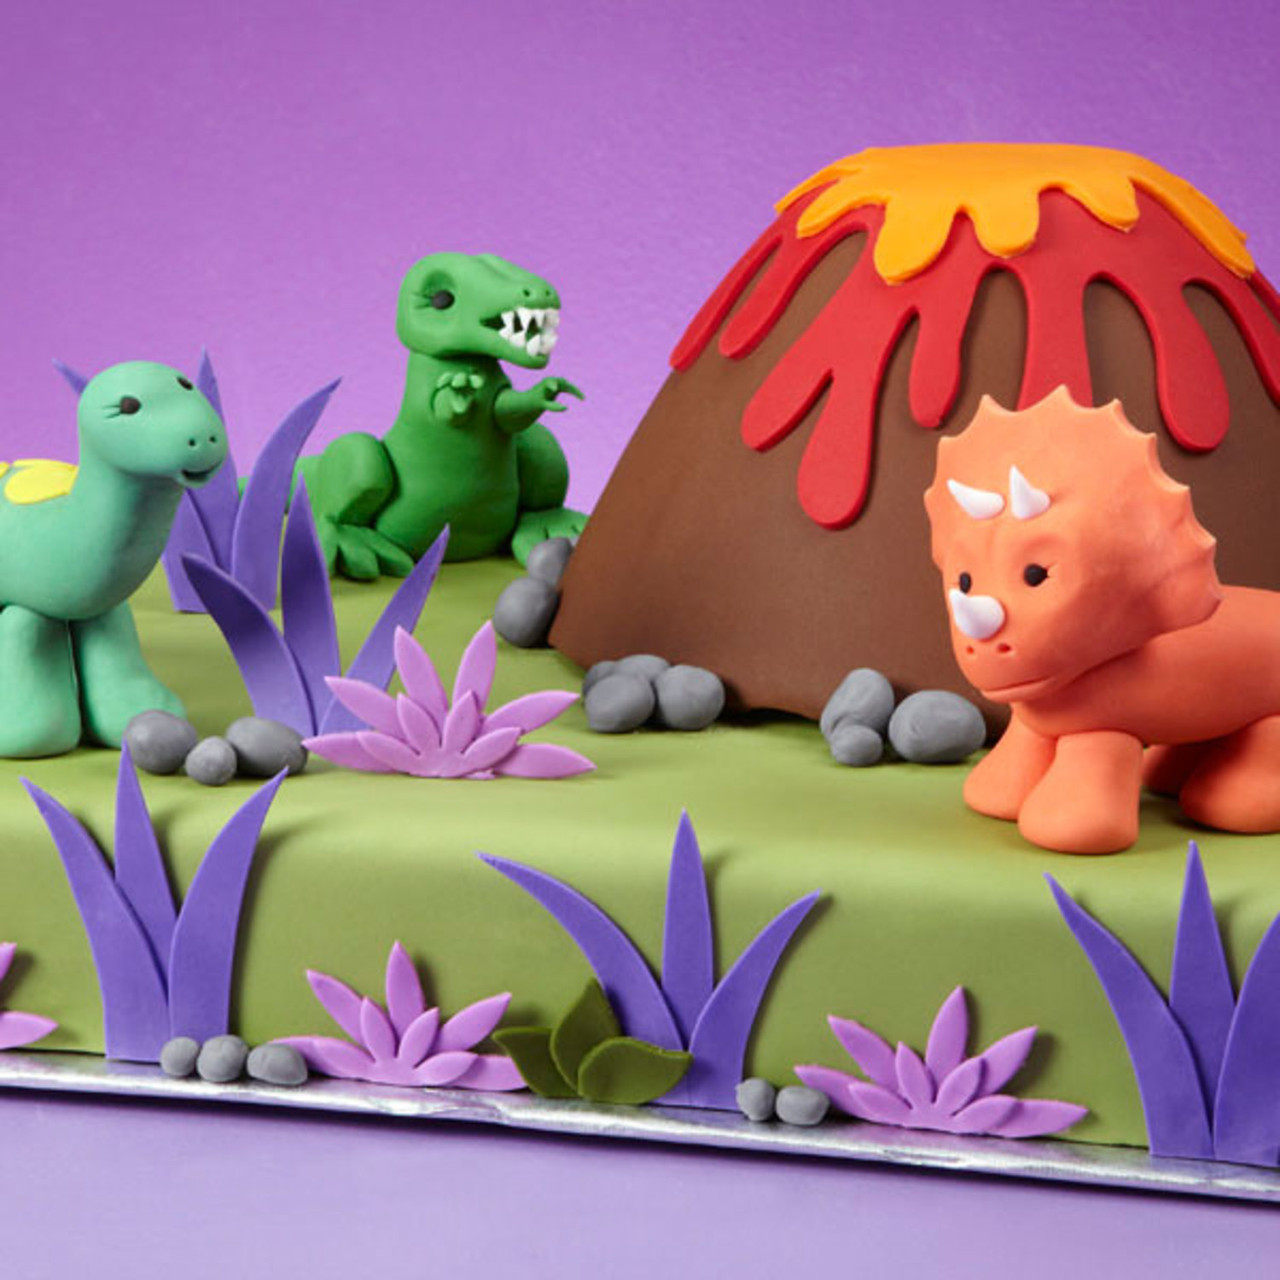 What is the use of dinosaur cake pan?, by Victoriauk